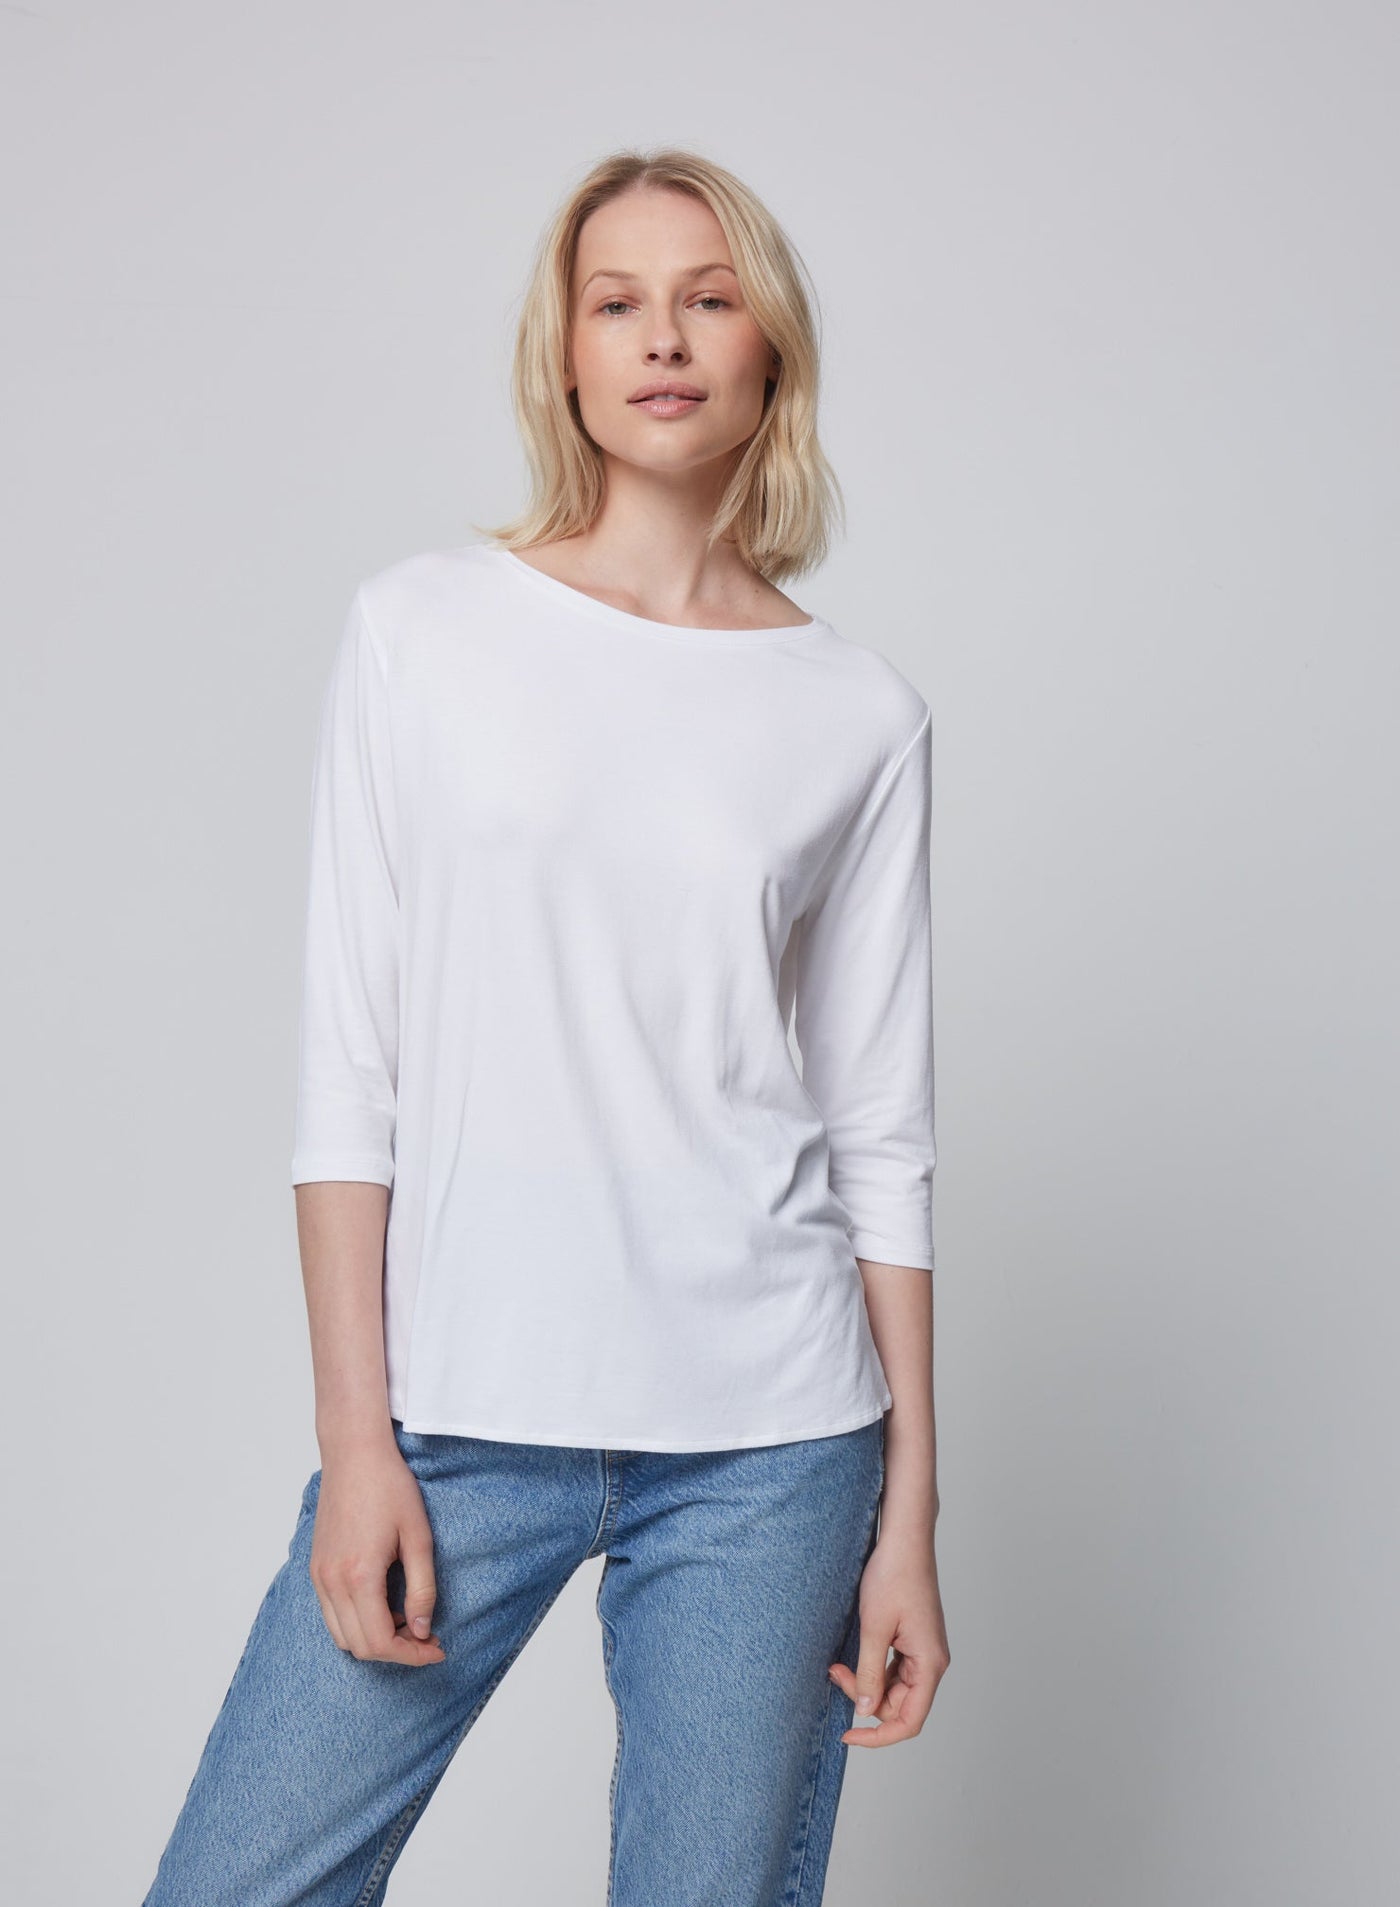 Soft Touch Relaxed 3/4 Sleeve Boatneck T-Shirt - BOATNECK 3/4 SLV - Majestic Filatures North America